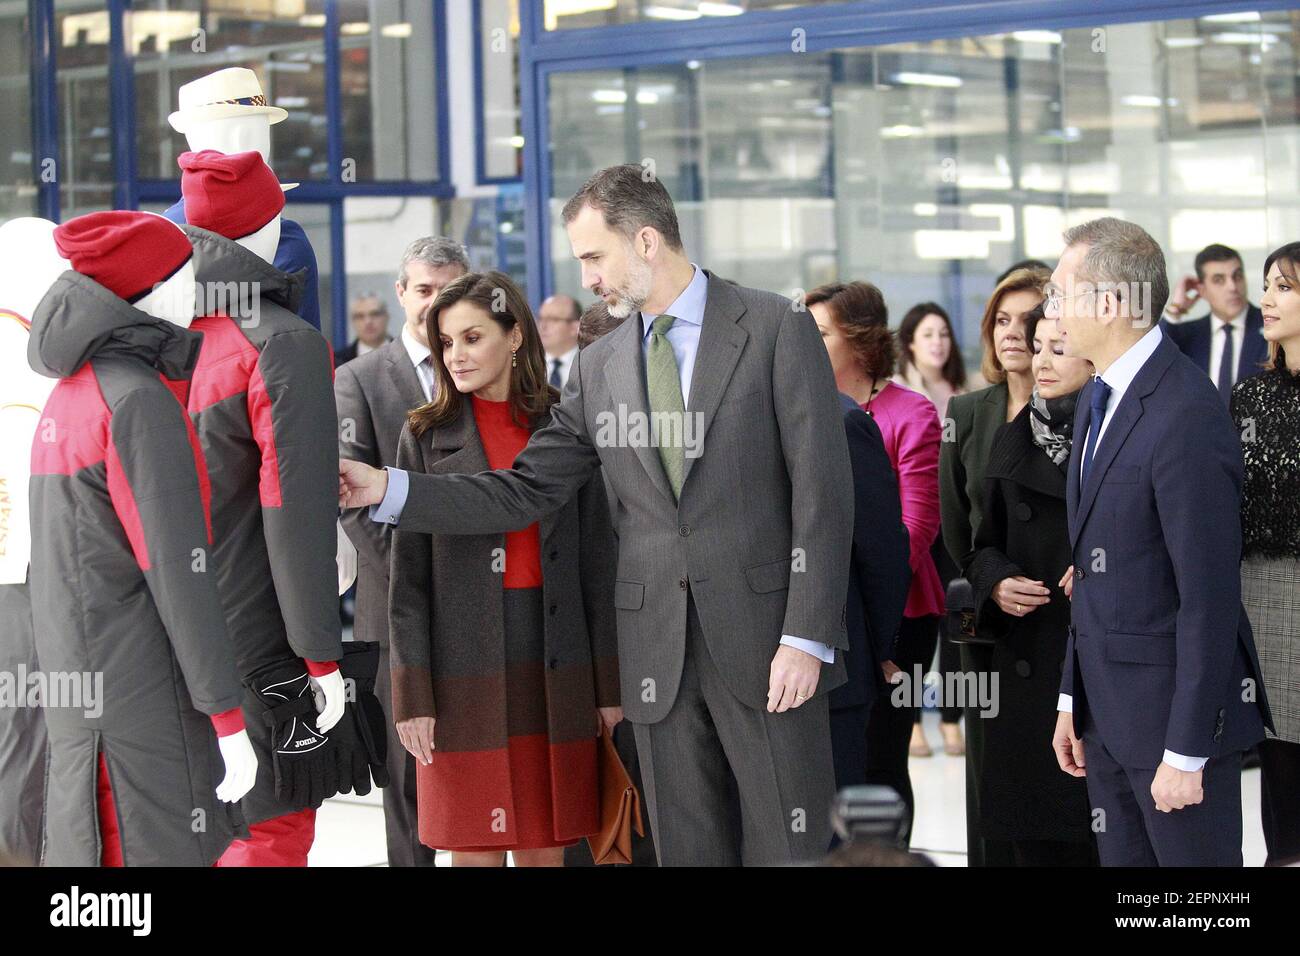 King Felipe VI of Spain and Queen Letizia of Spain during the visit to the facilities of the Spanish sportswear company JOMA Sports. January 19, 2018. (Photo by Acero/Alter Photos/Sipa USA) Stock Photo